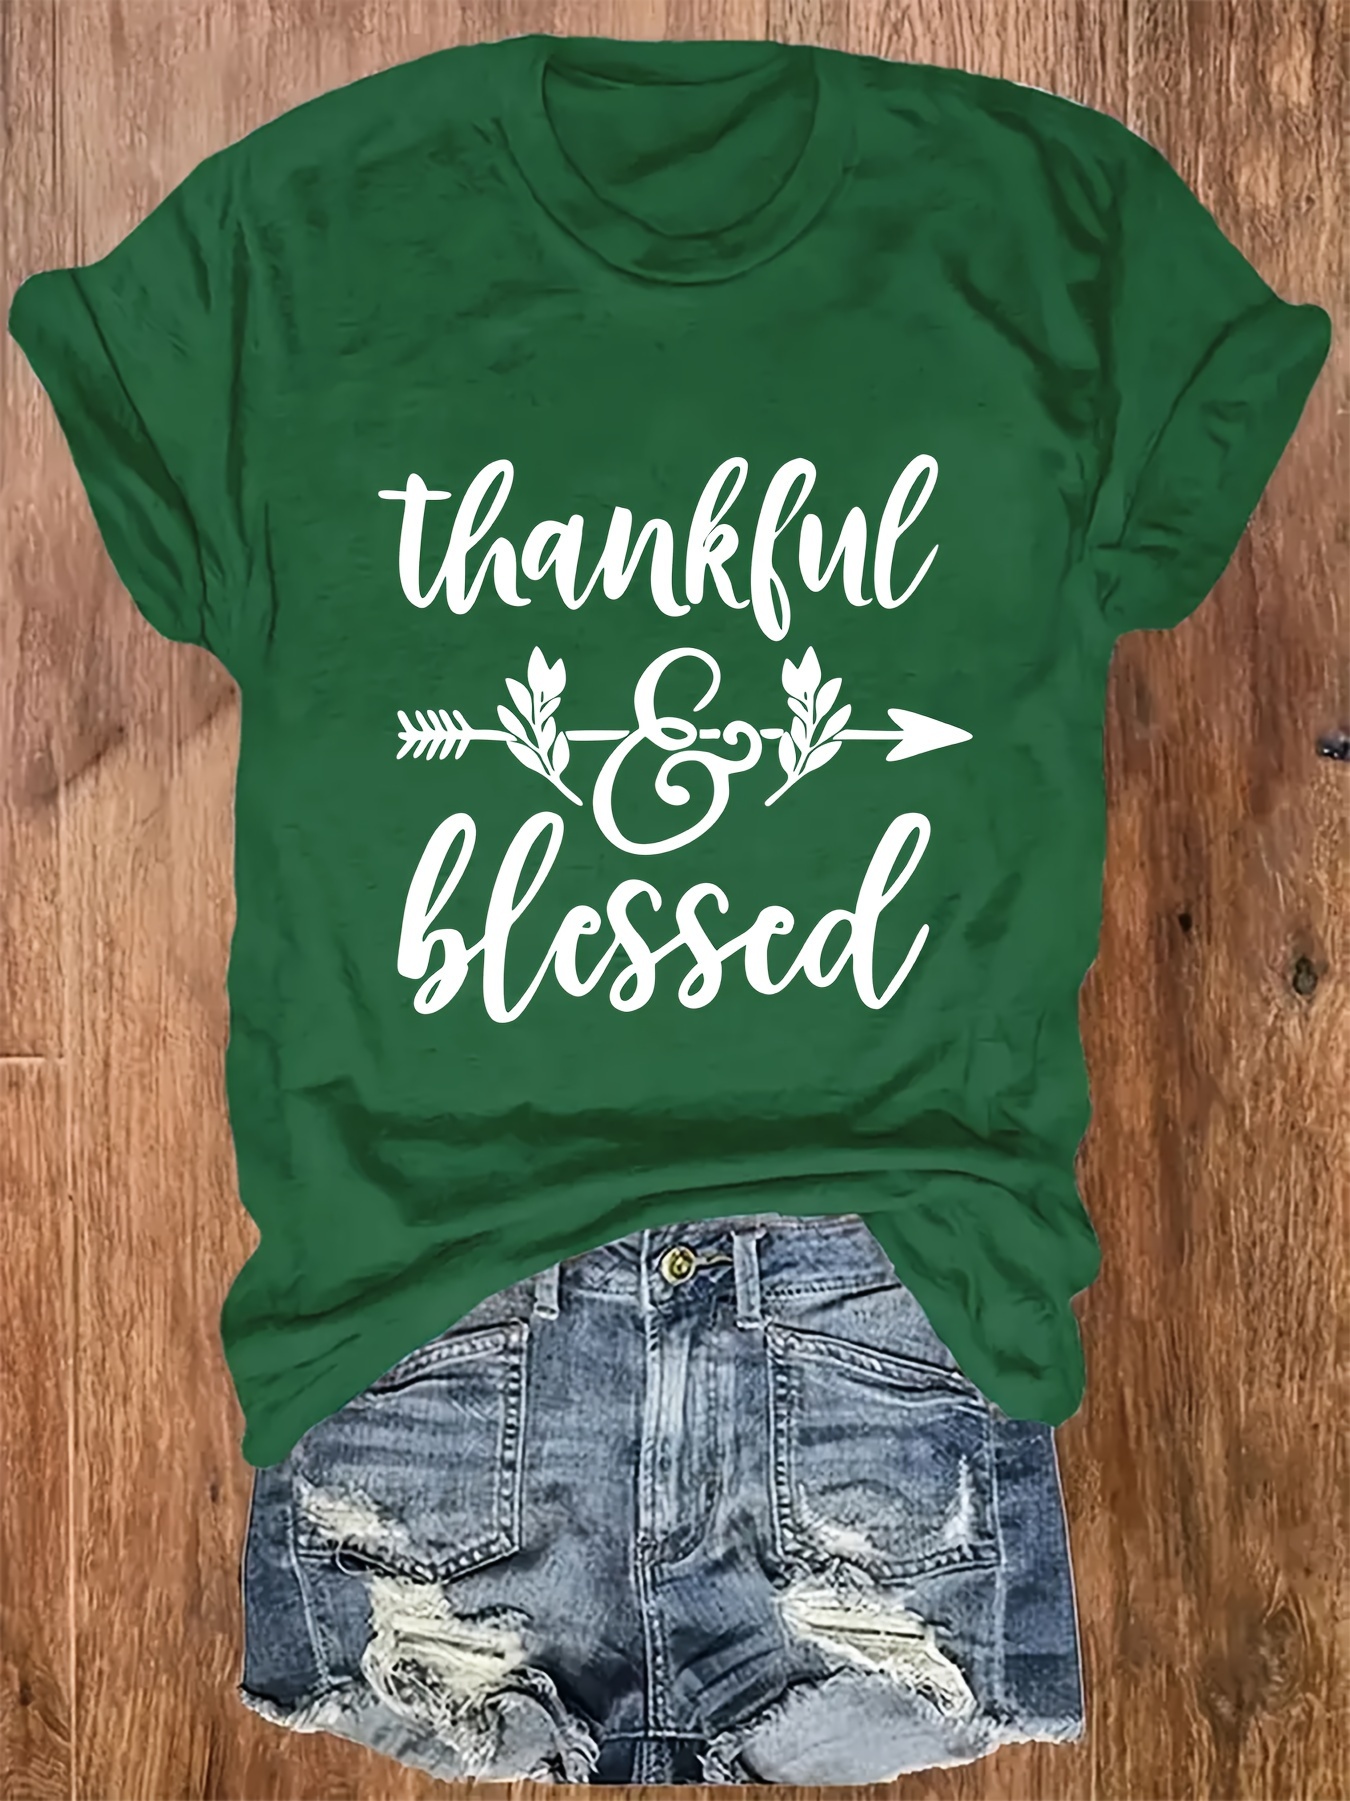 plus size thankful blessed print t shirt casual crew neck short sleeve top for spring summer womens plus size clothing